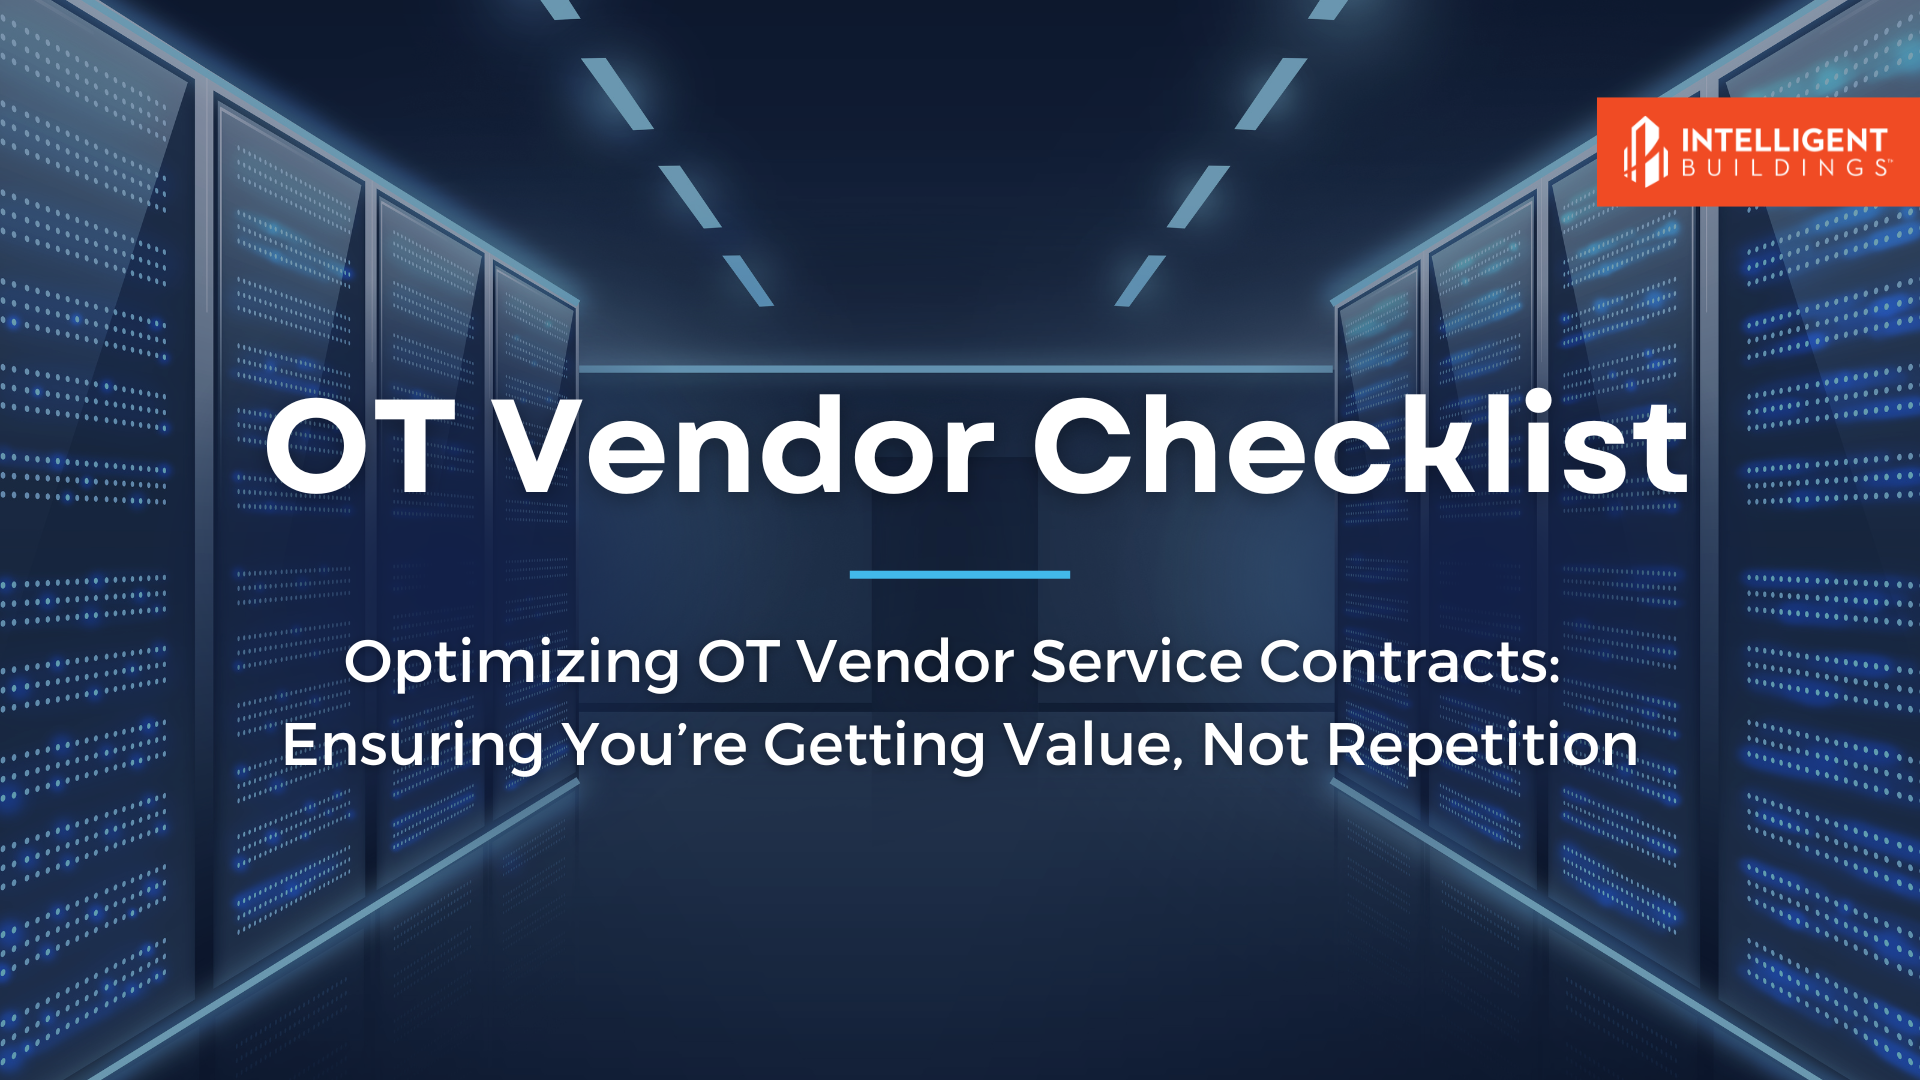 Optimizing OT Vendor Service Contracts: Ensuring You’re Getting Value, Not Repetition